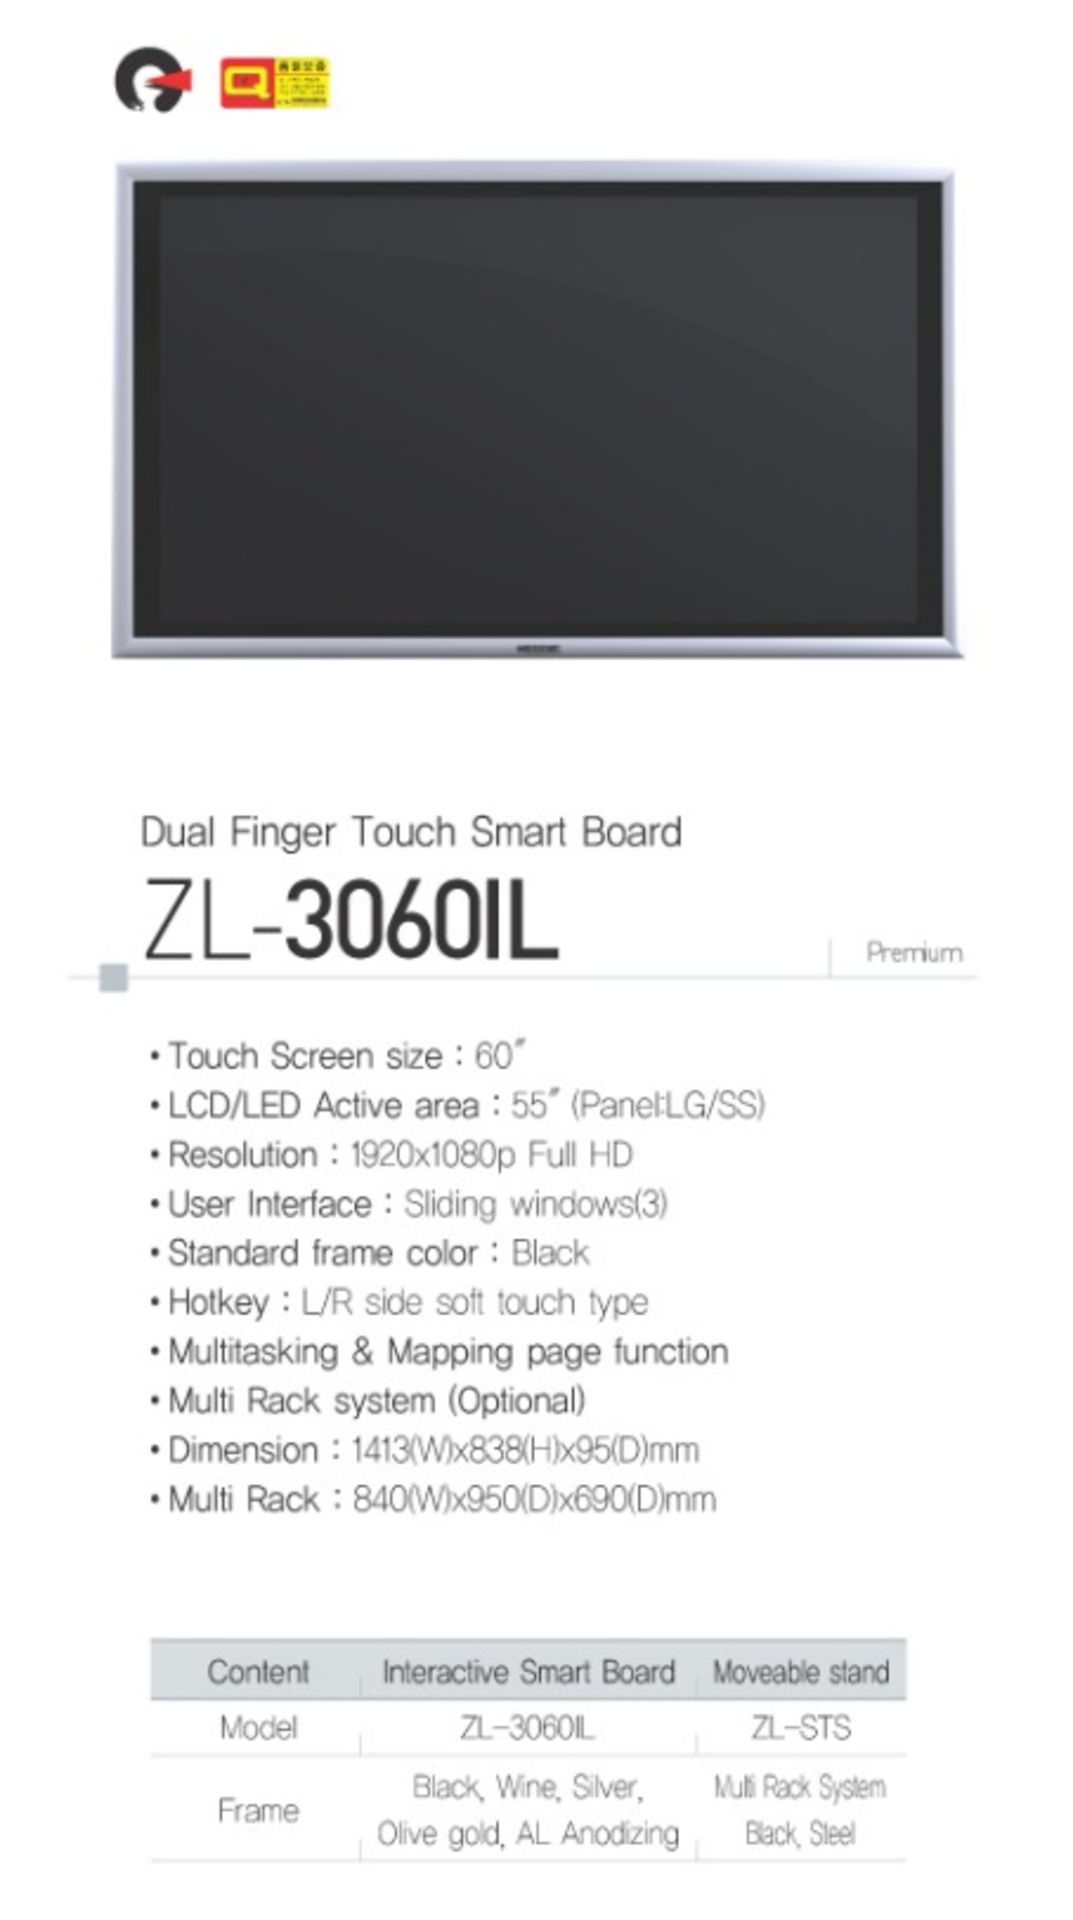 COMMBOX INTERACTIVE LED TOUCHPANEL MODEL: ZL-3060IL NEW IN THE BOX WITH WALL MOUNT - Check the video - Image 4 of 6